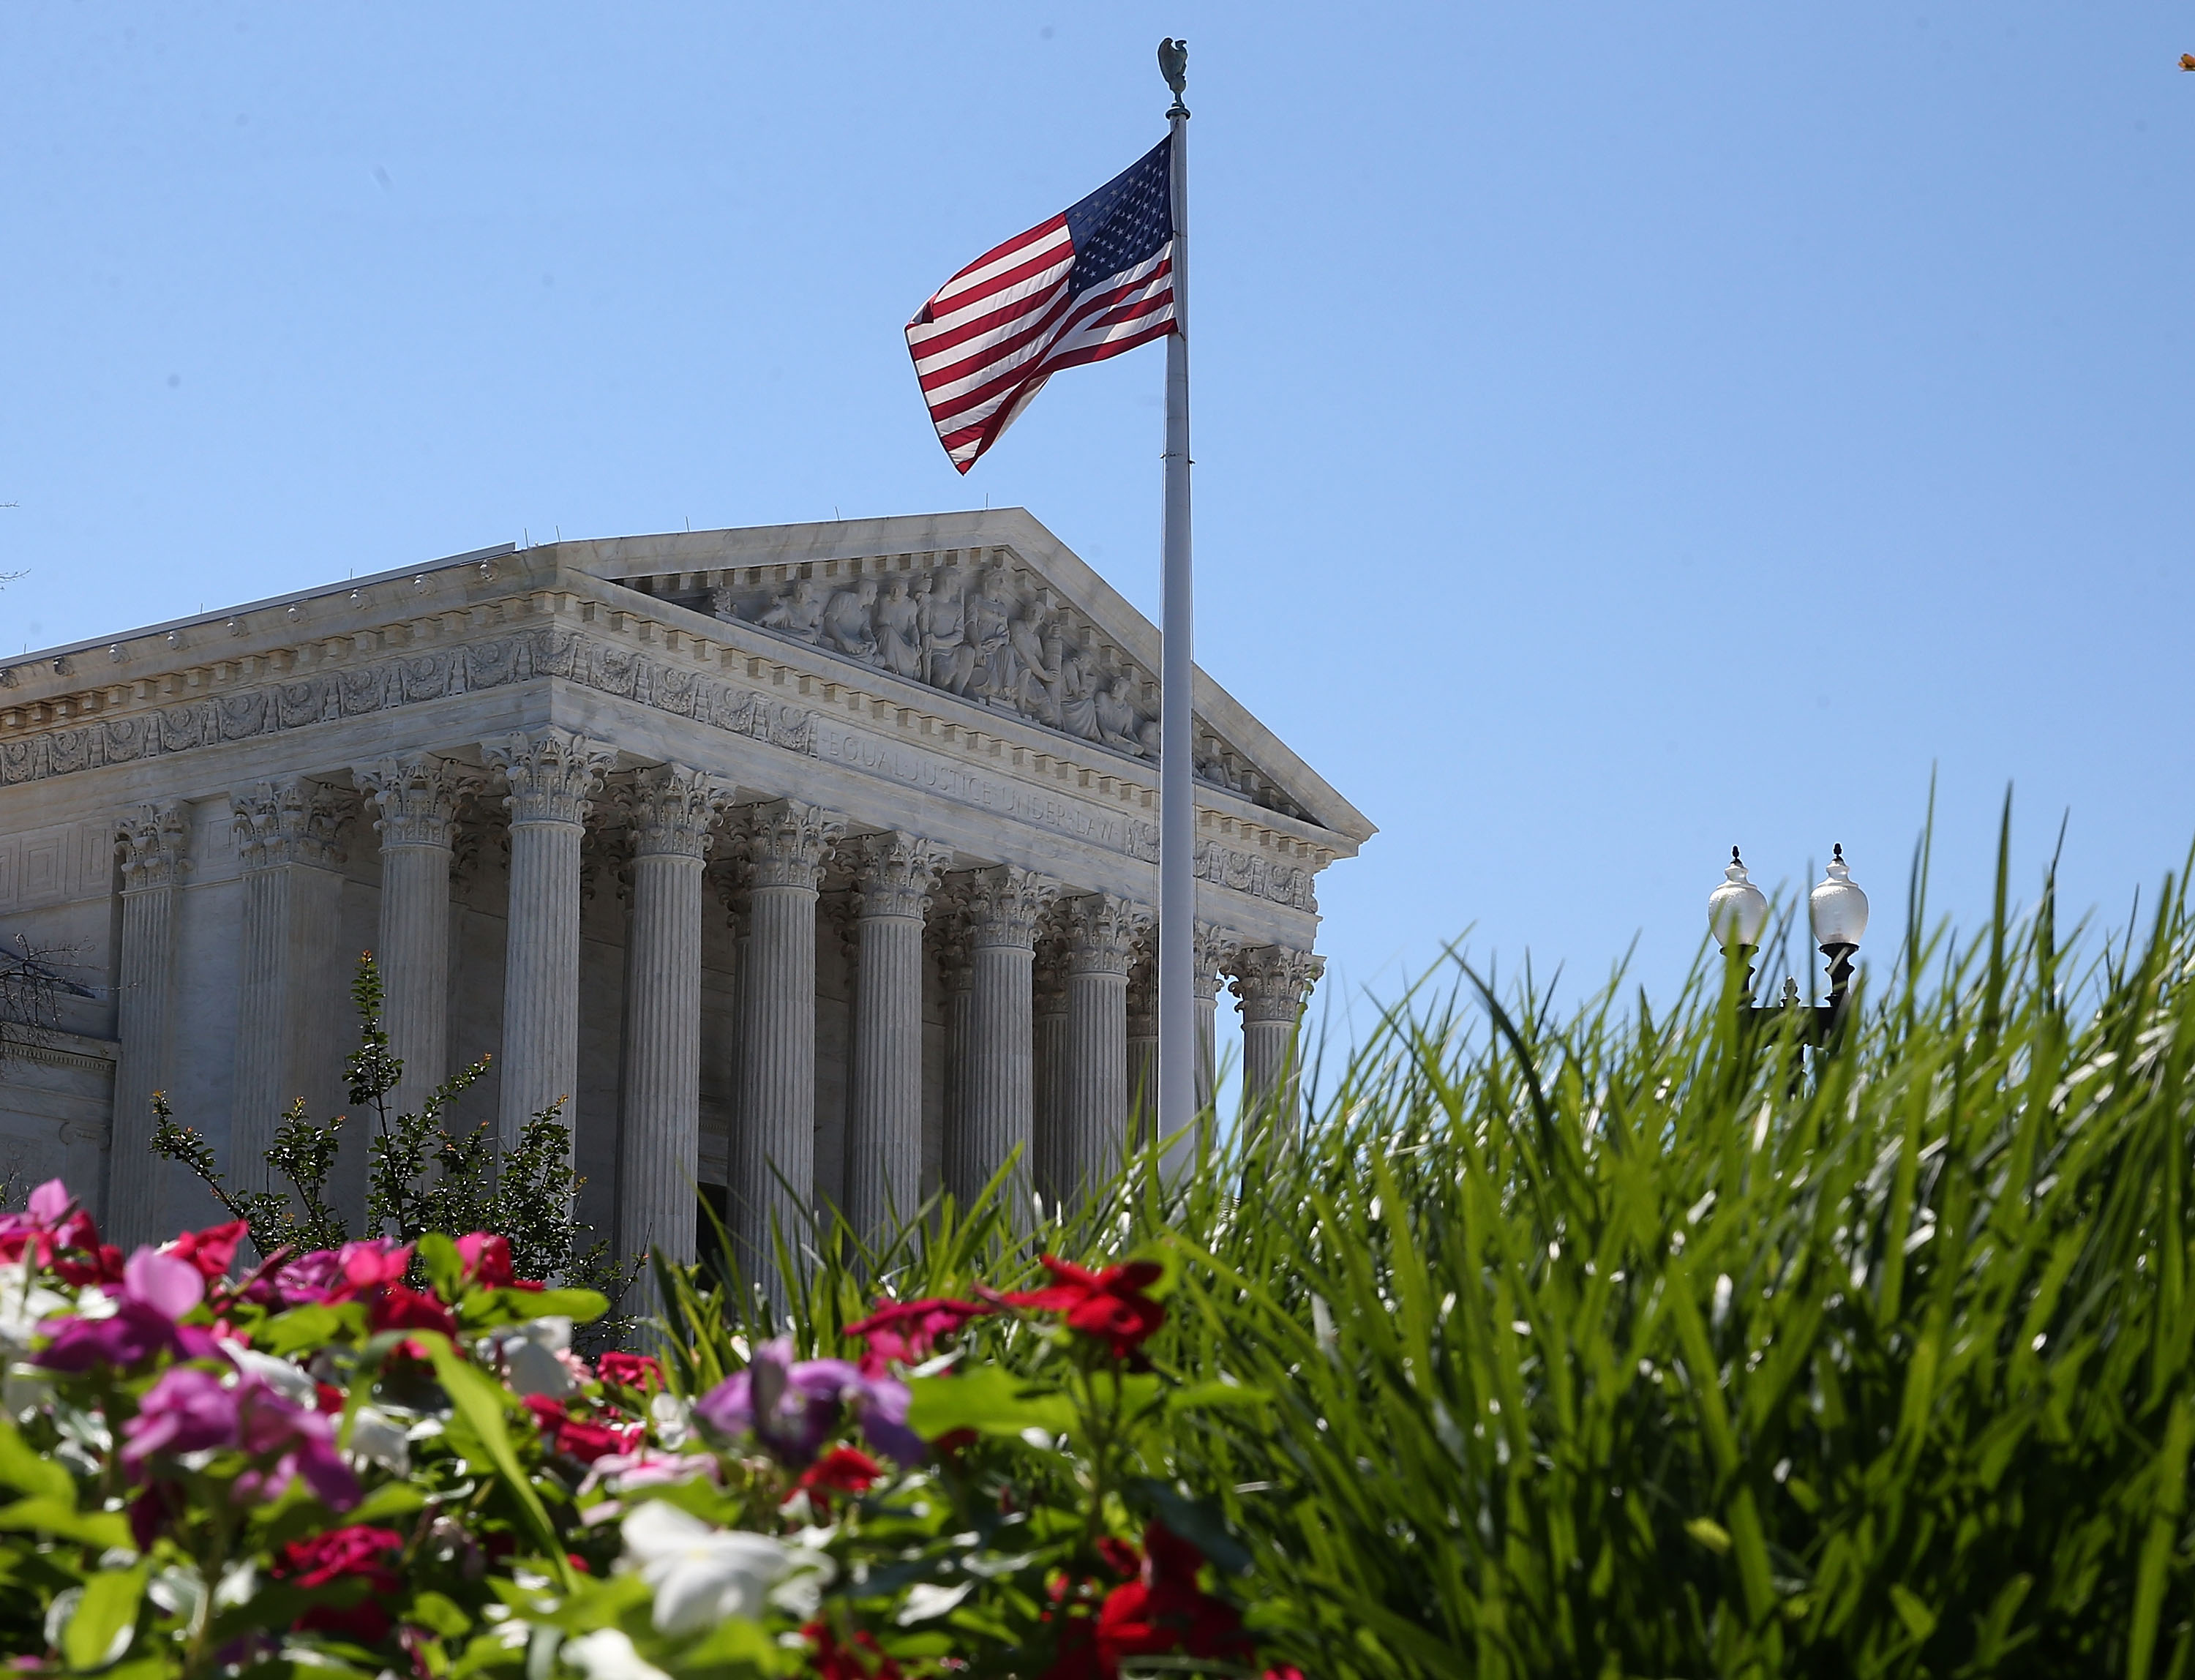 The Supreme Court Issues Orders On Lethal Injection And Redistricting